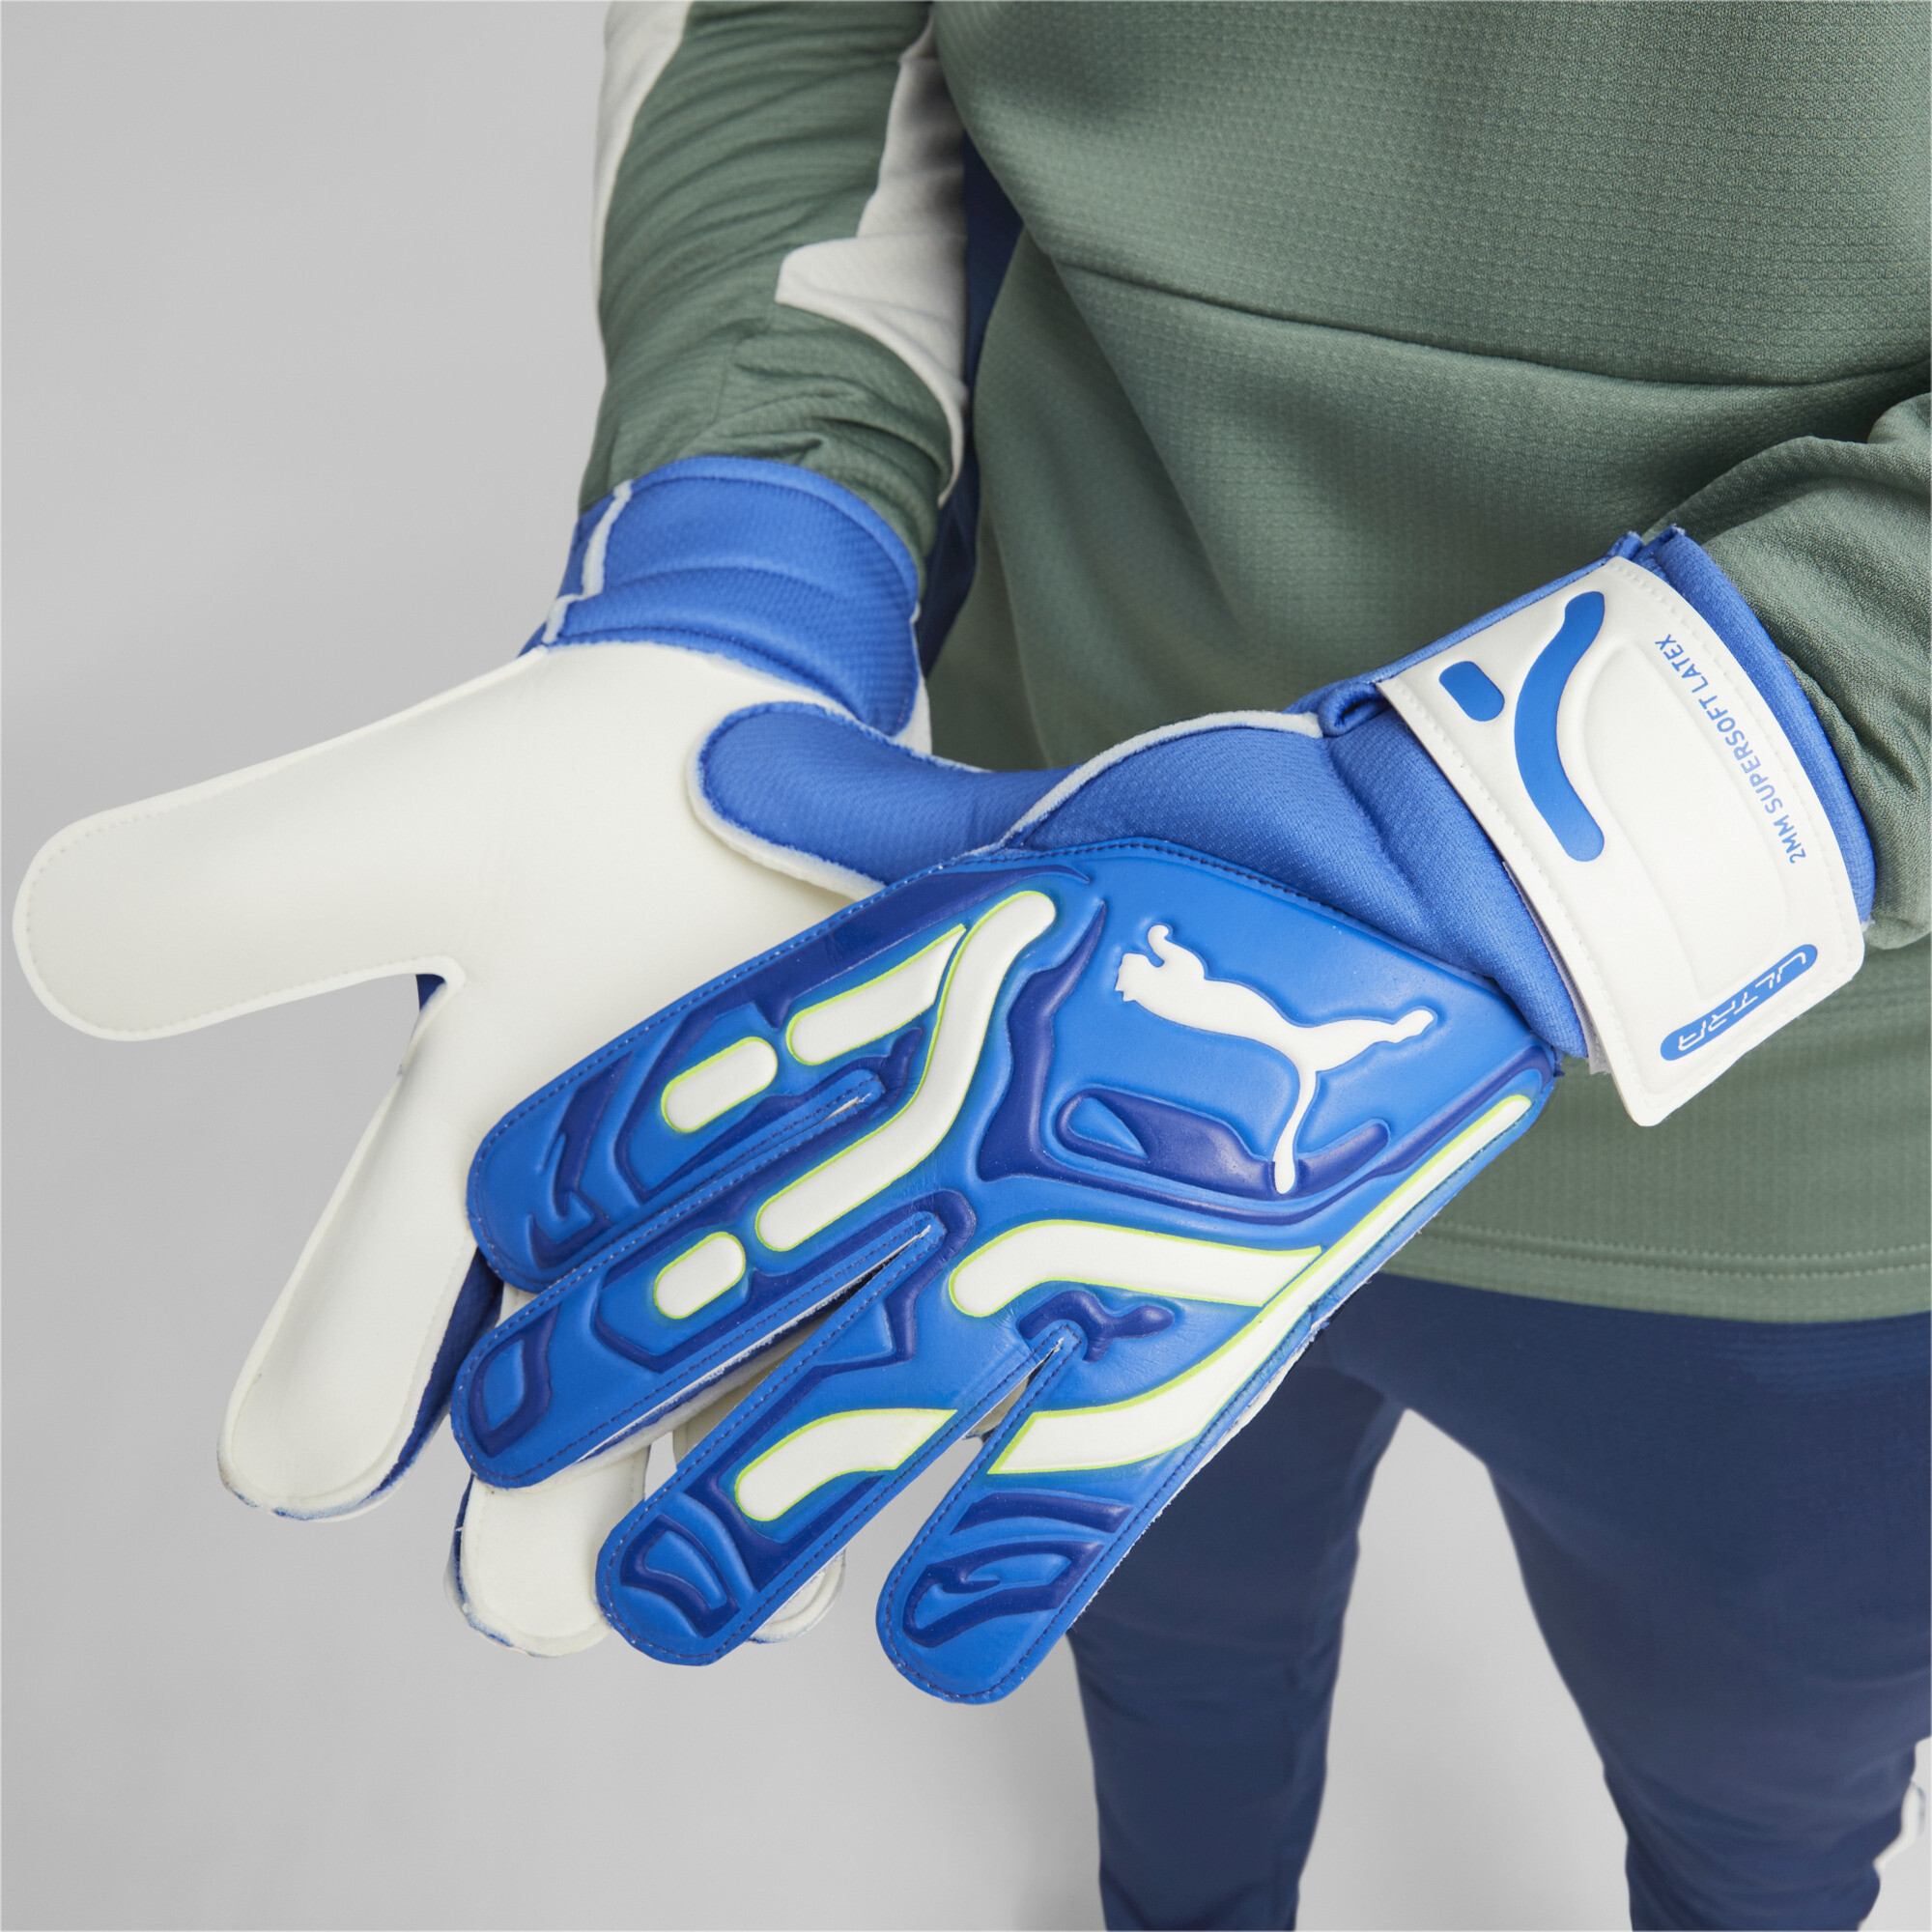 Puma ULTRA Play RC Goalkeeper Gloves, Blue, Size 10, Accessories